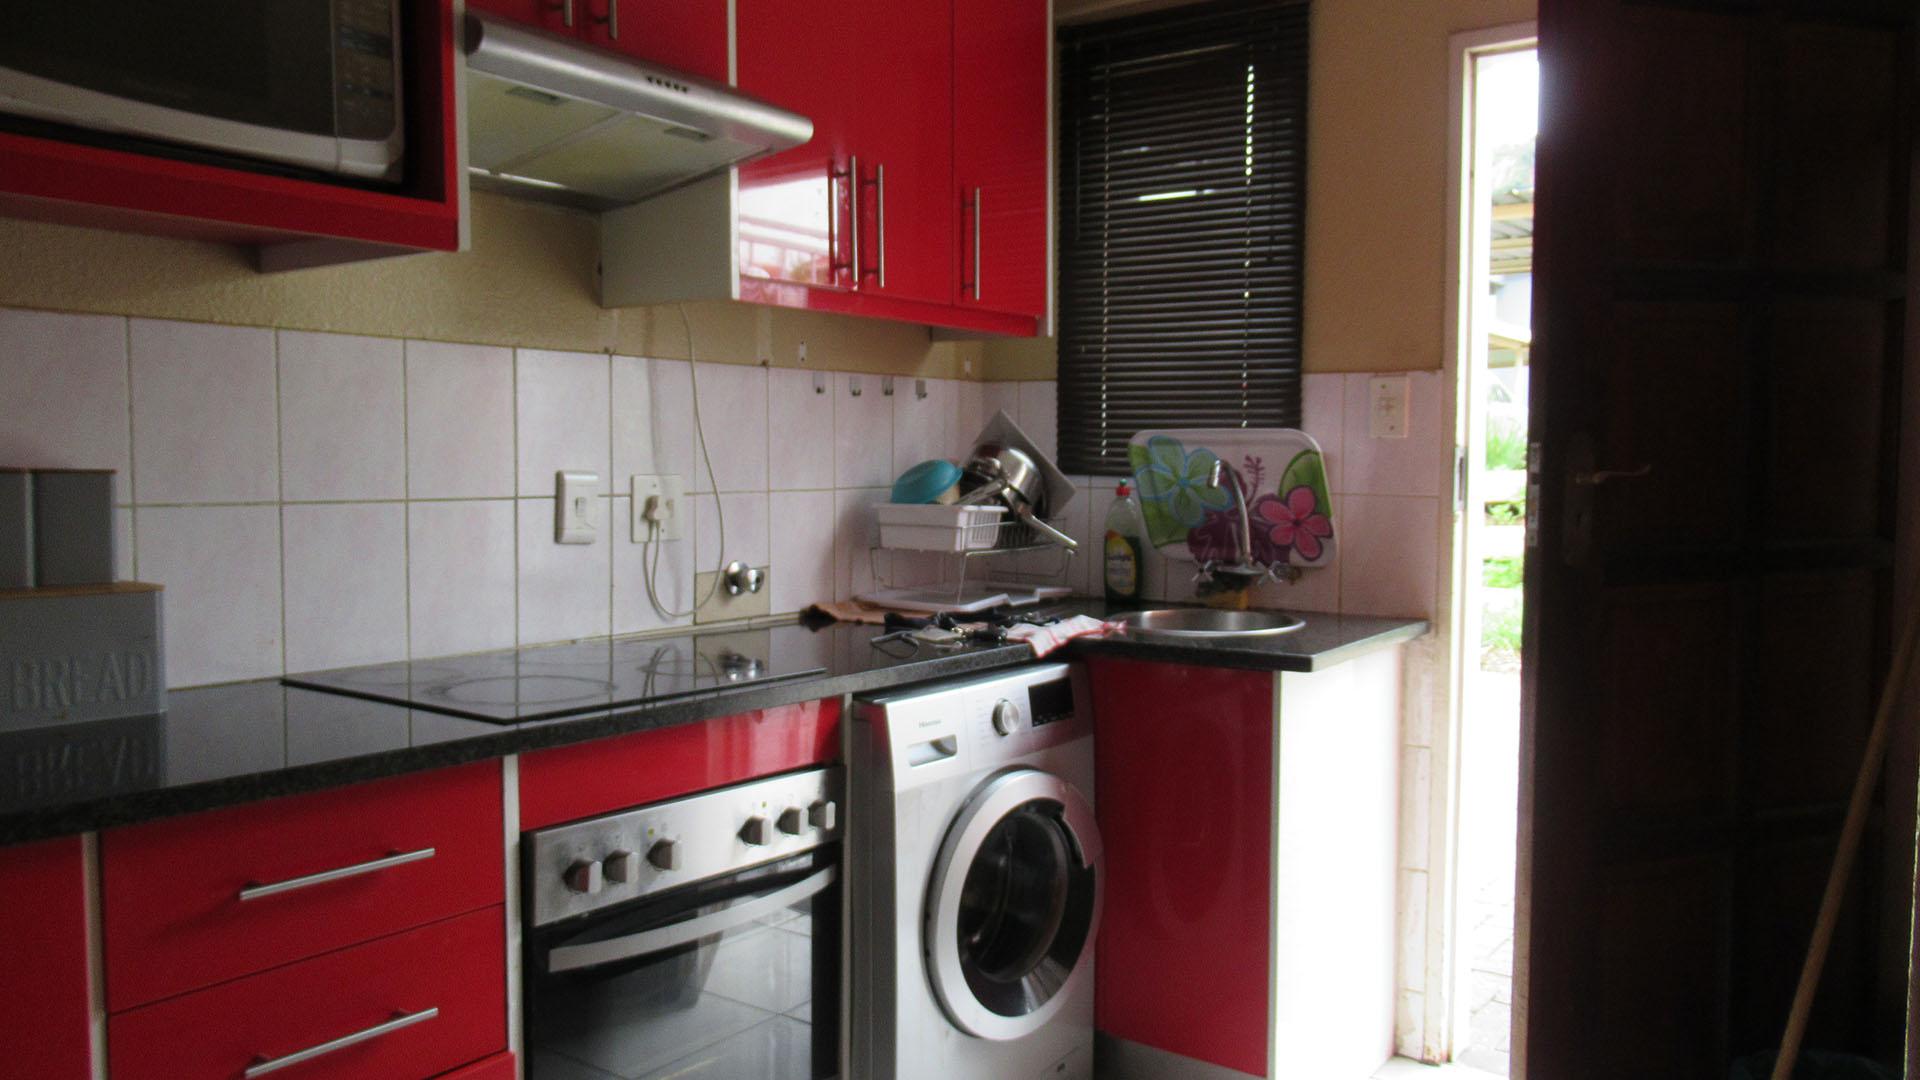 Kitchen - 7 square meters of property in Linmeyer